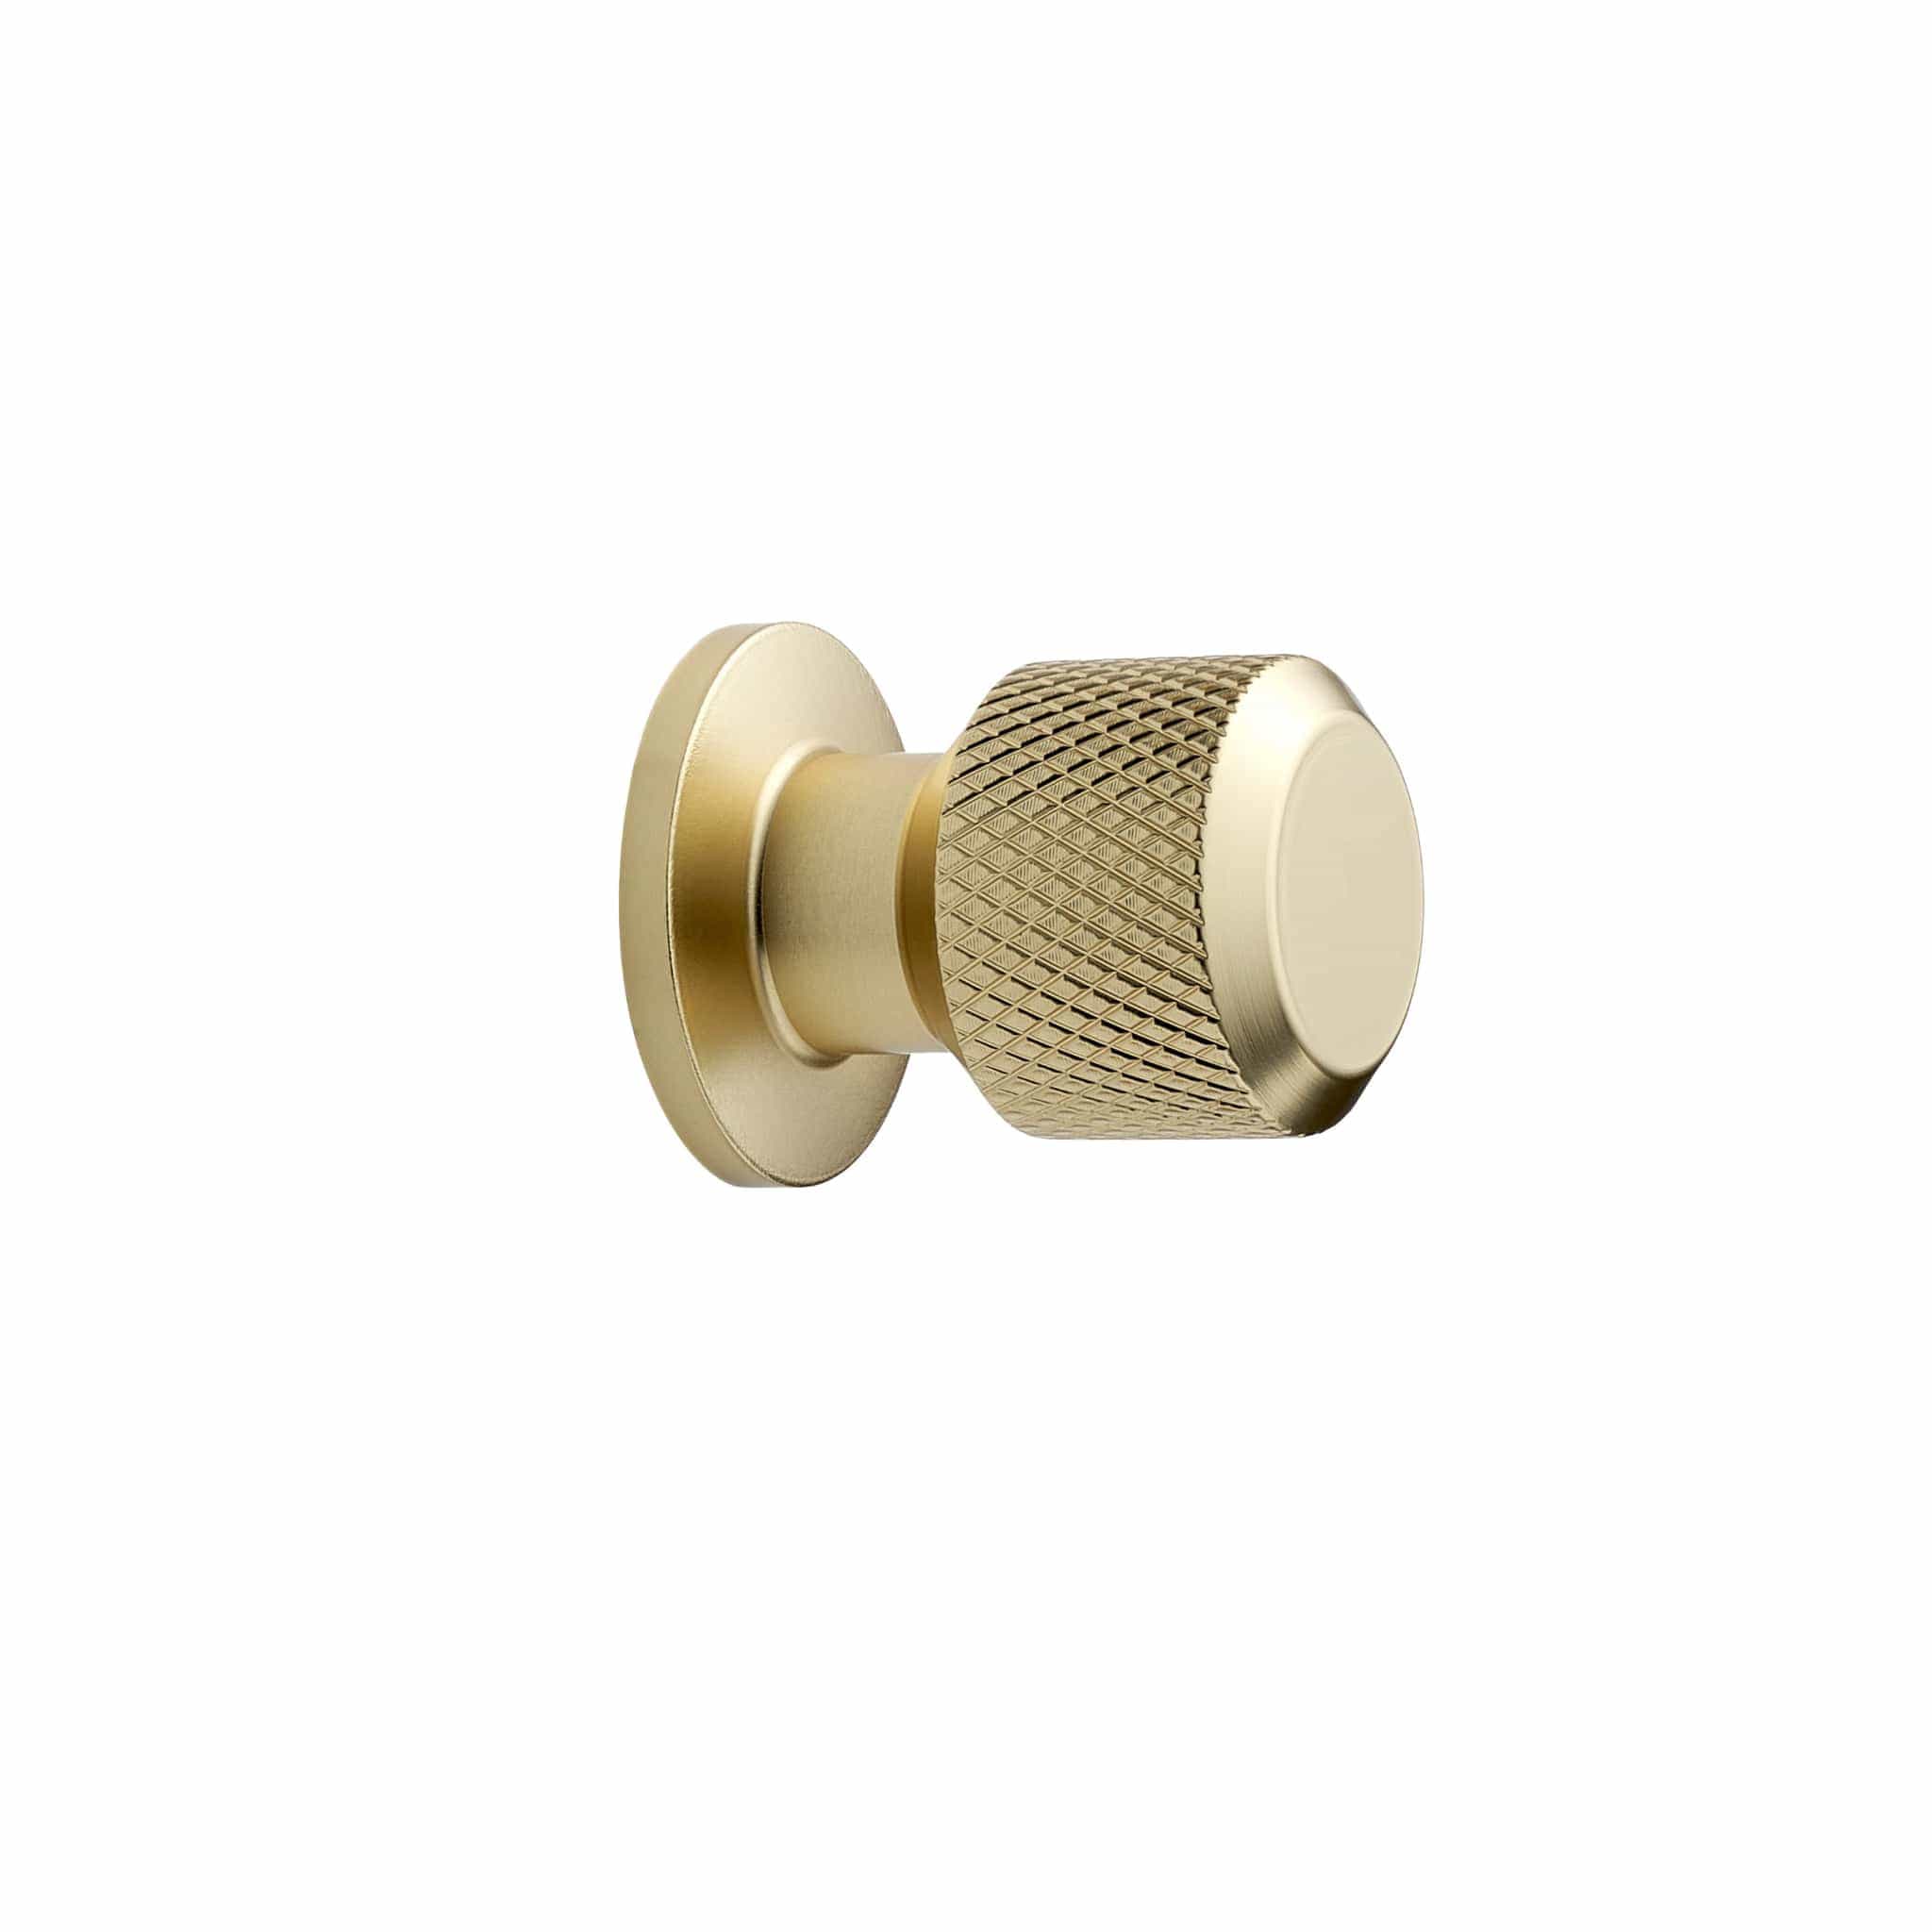 Manor Round | Knop i Messing/Guld Finish Ø 30 mm Furnipart FP-549220025-34 FINICC